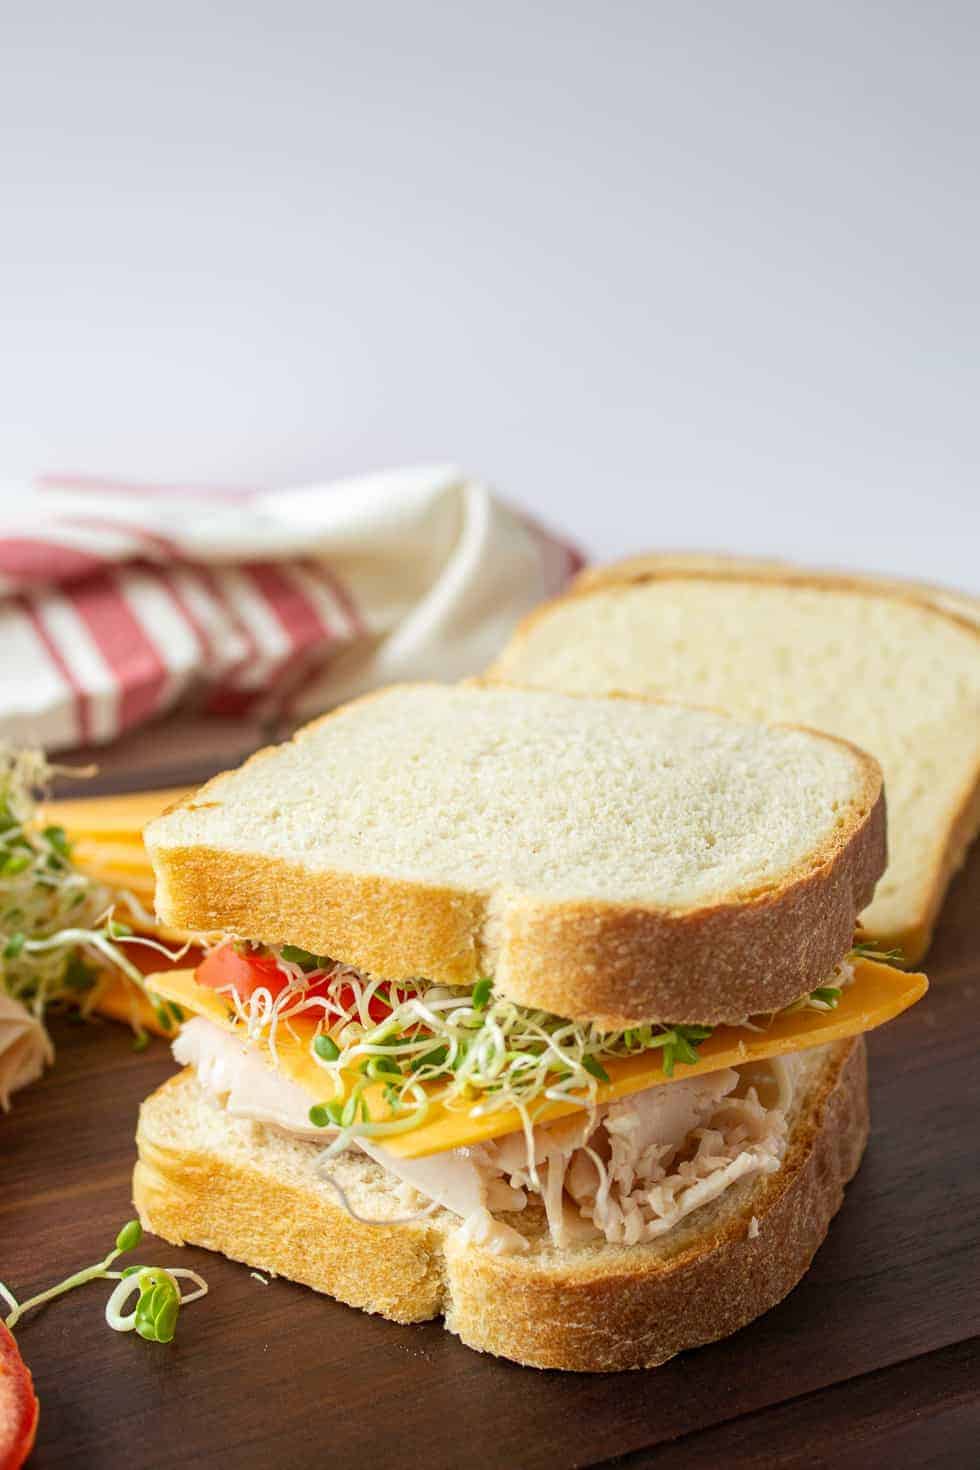 Turkey sandwich with tomatoes, cheese and sprouts on a brown board.